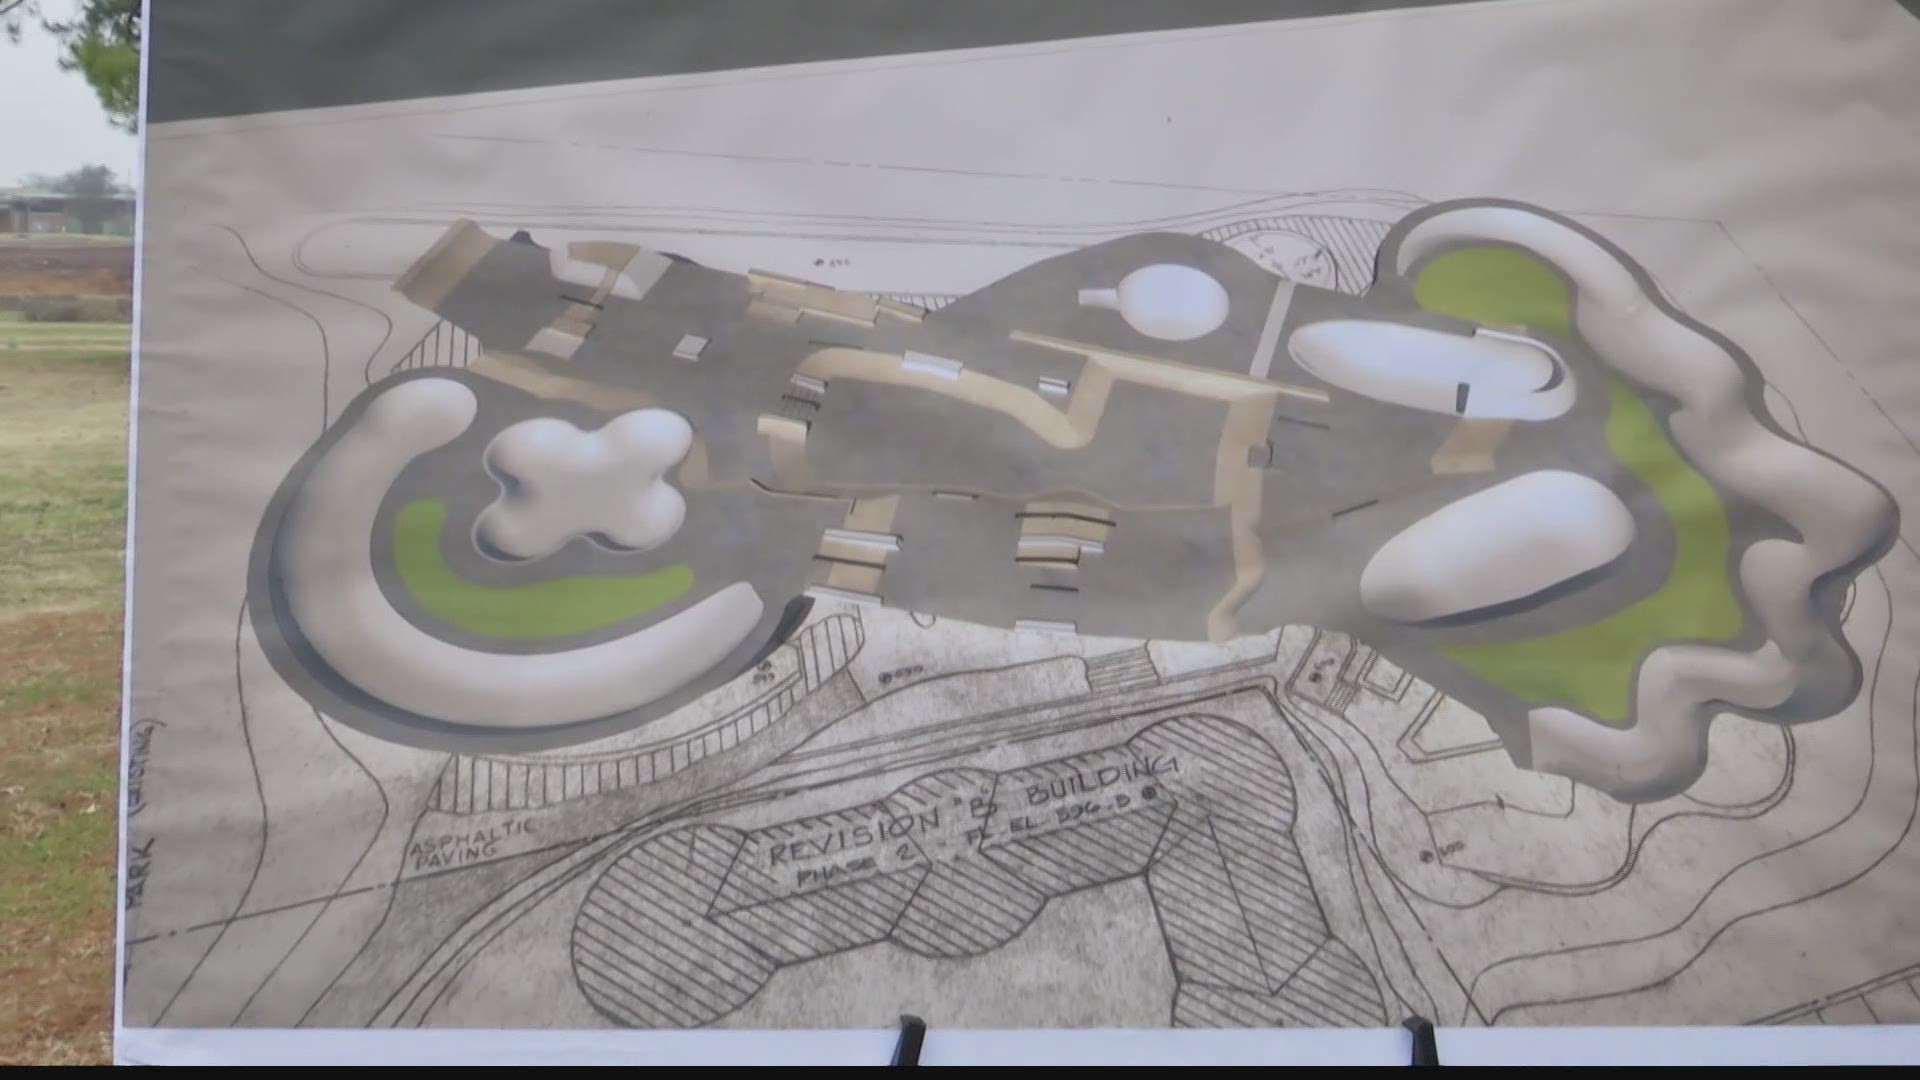 Elements of the historic Get-A-Way Skatepark will be incorporated into the new facility.